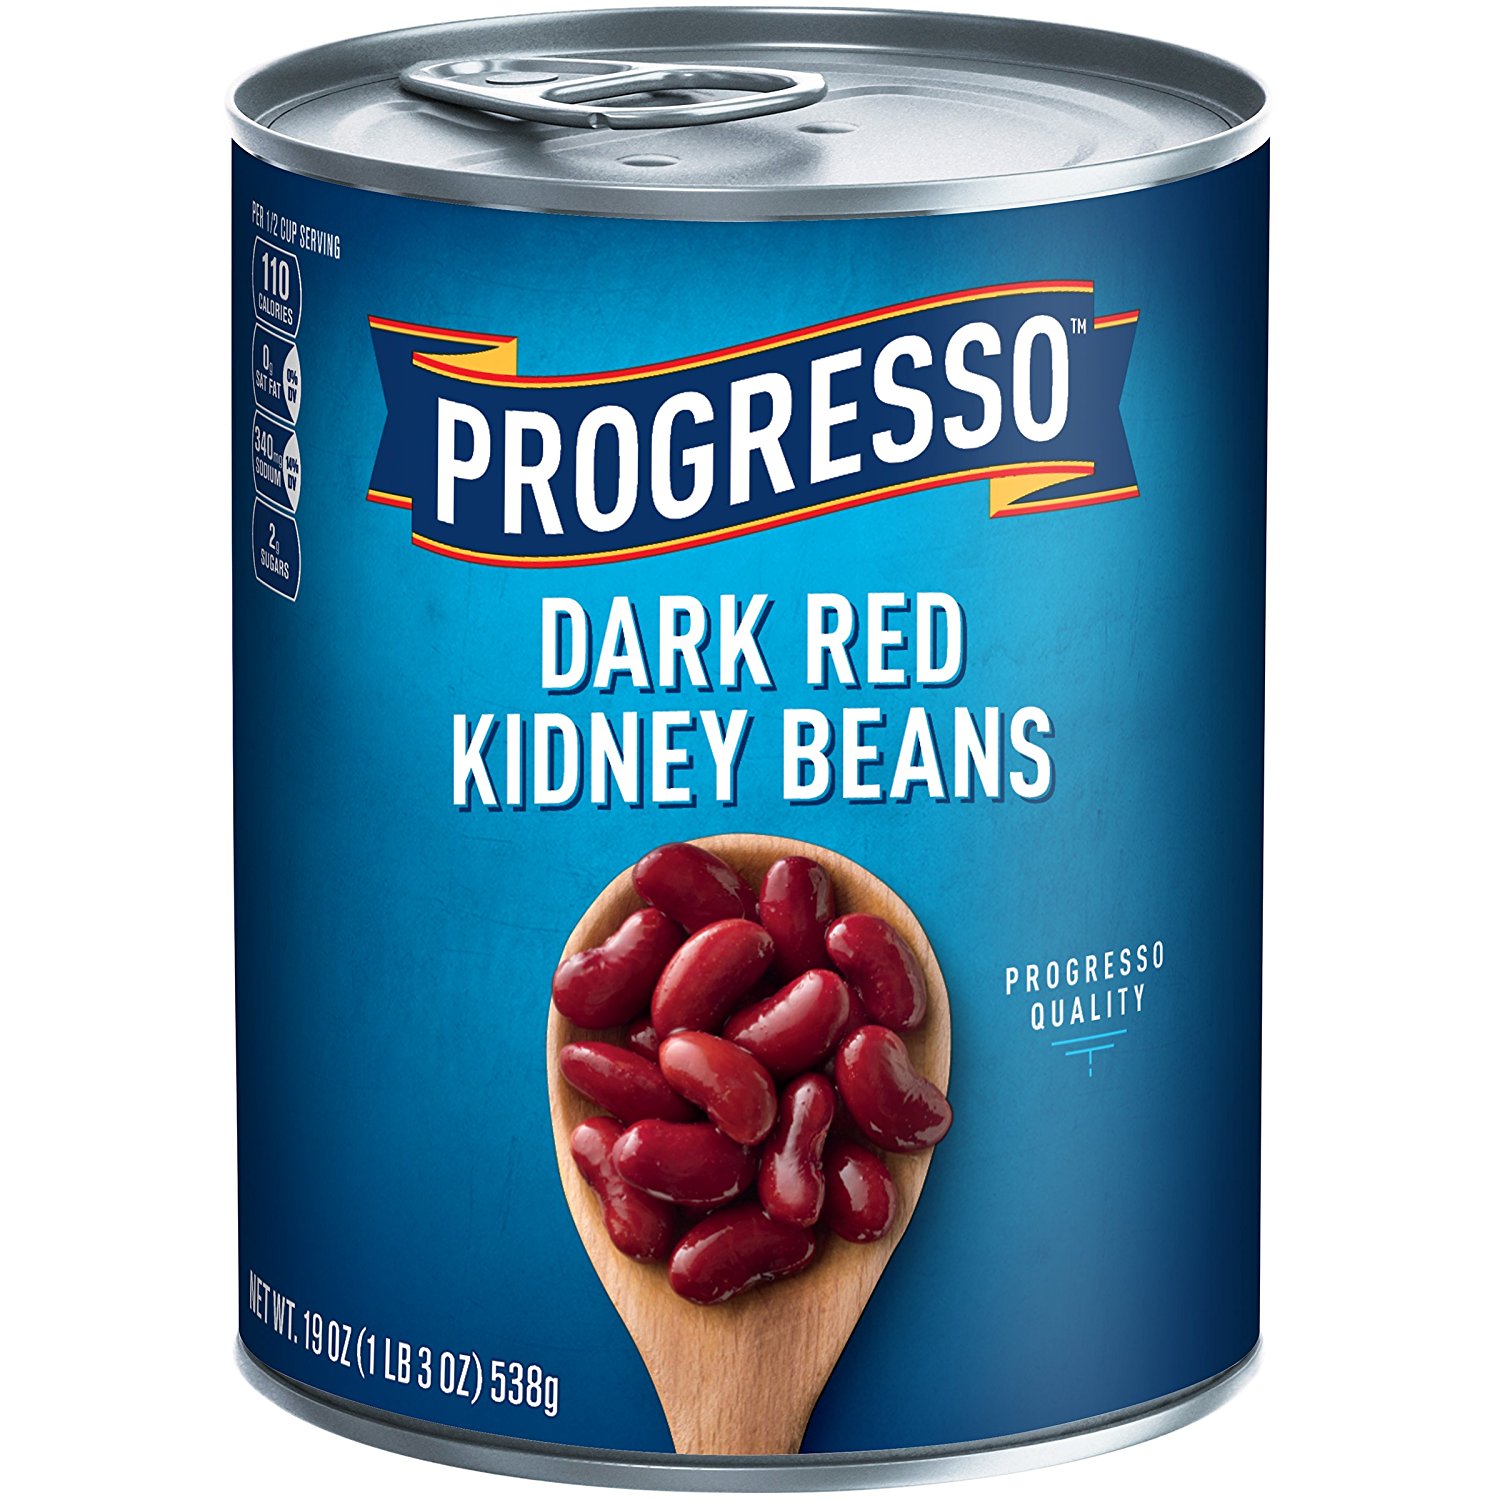 Amazon.com : Progresso Dark Red Kidney Beans, 19 oz Cans (Pack of 24 ...